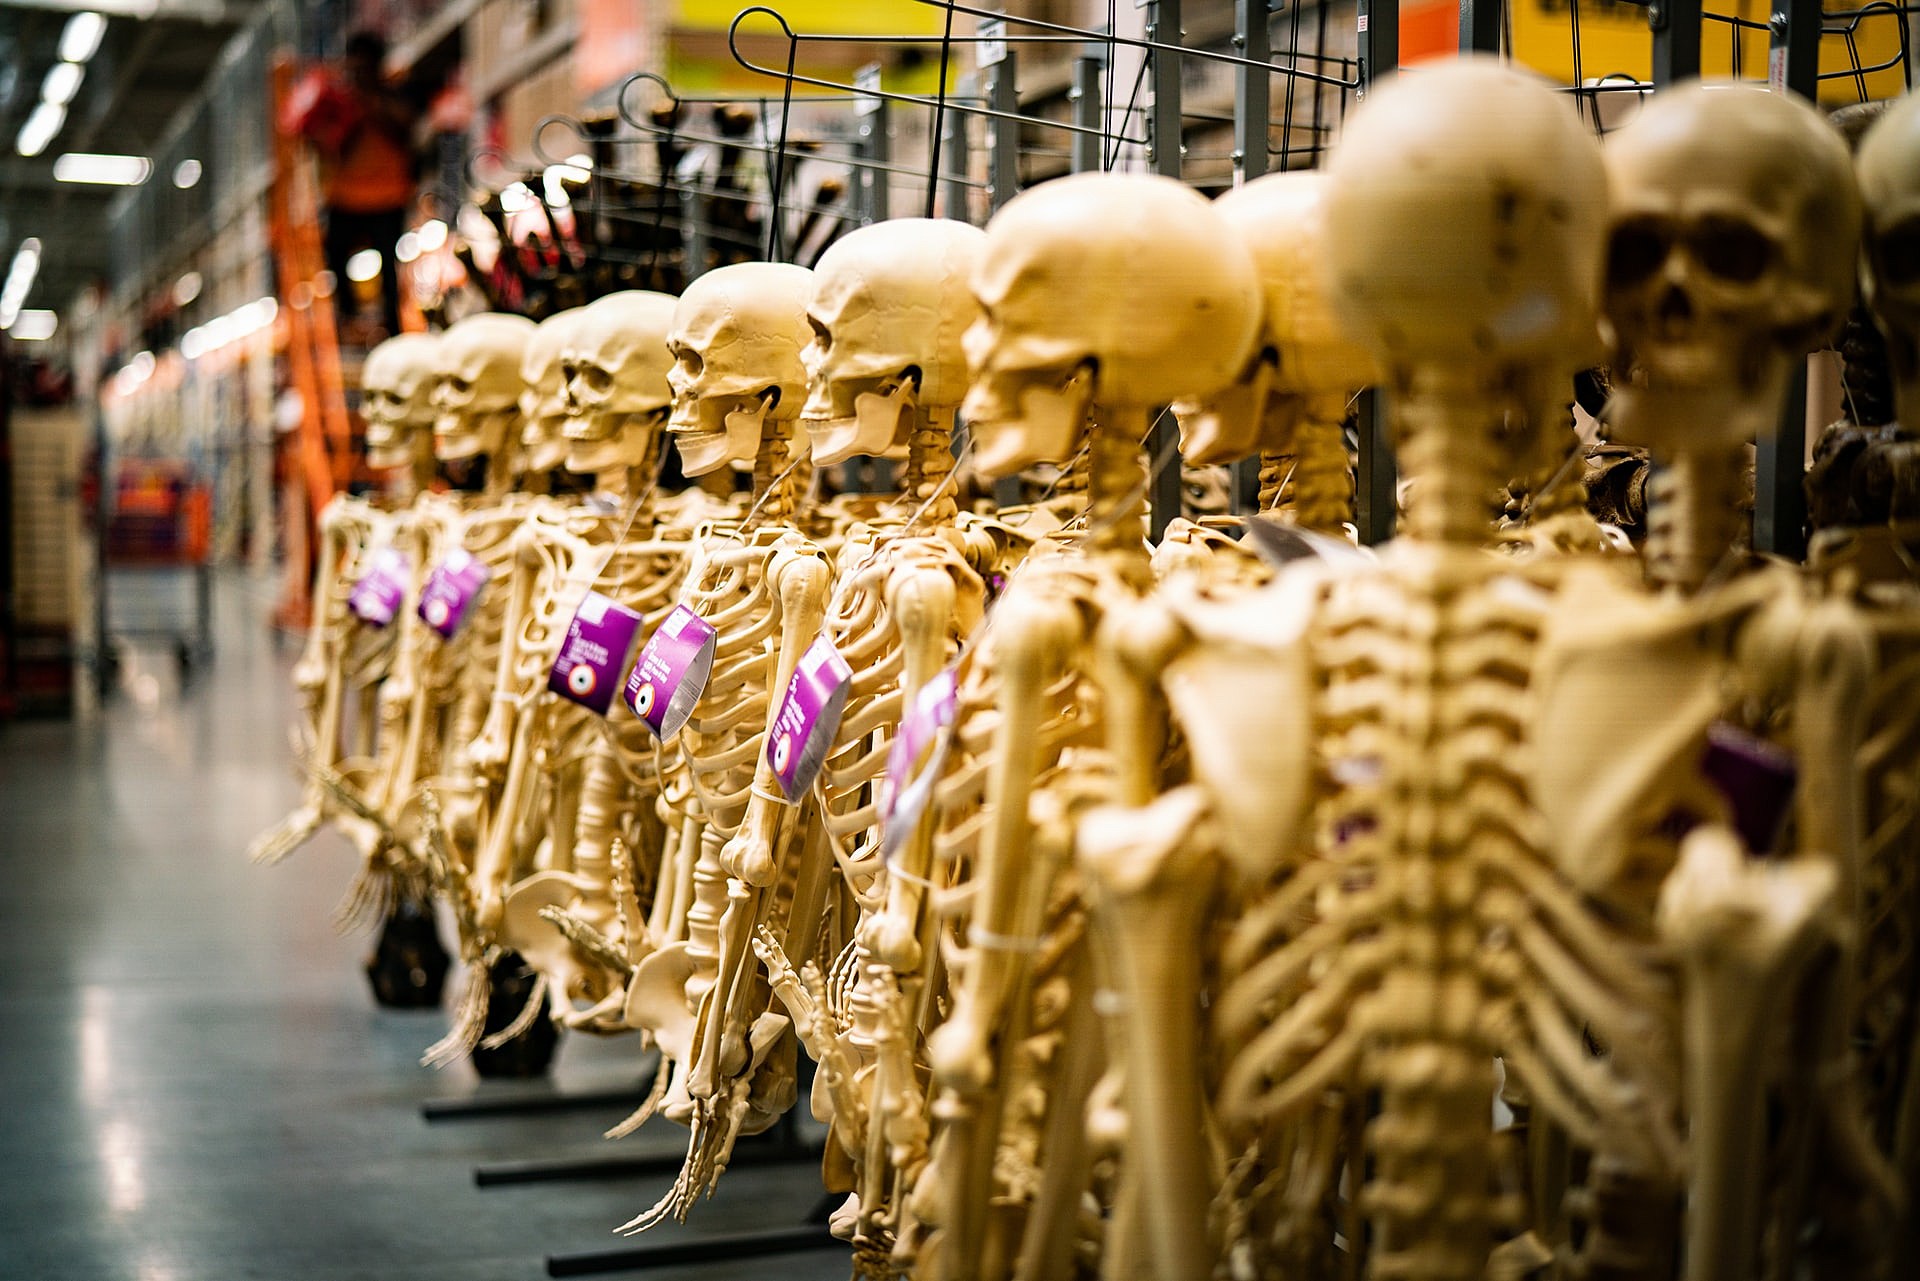 Fans Of Halloween Will Love The Haunted Flea Market In Illinois photo picture